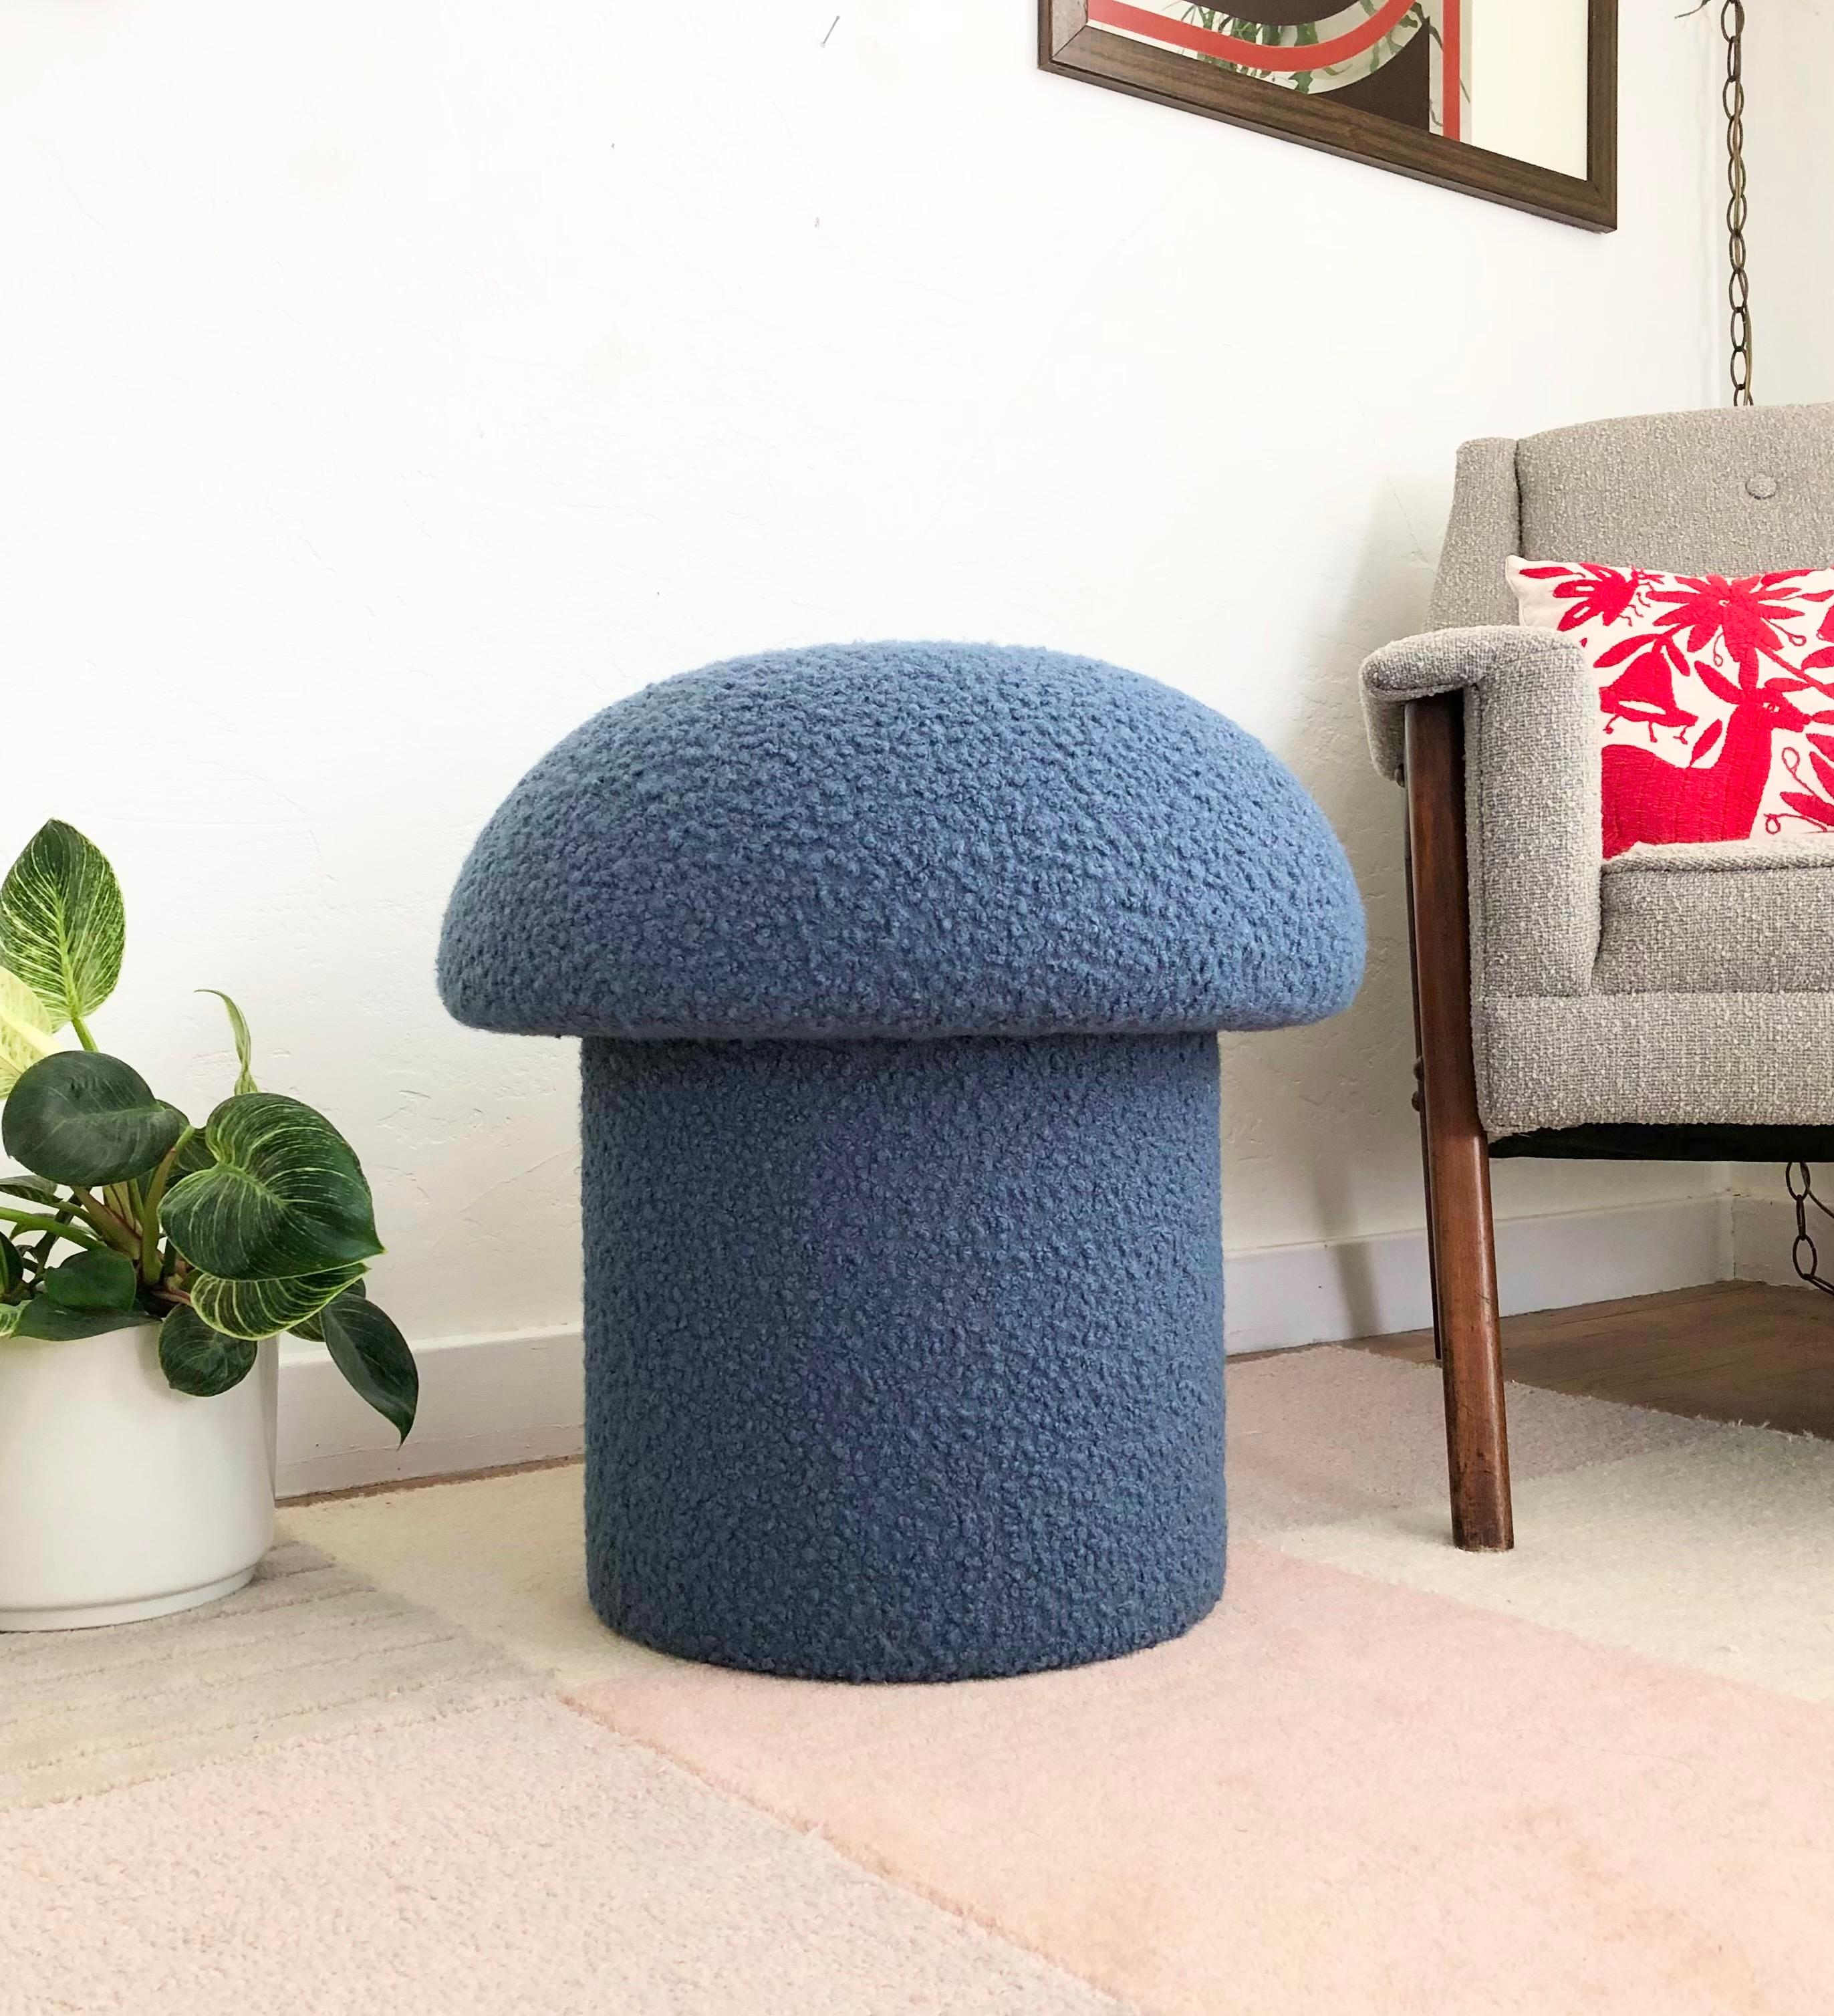 A handmade mushroom shaped ottoman, upholstered in a denim blue colored curly boucle fabric. Perfect for using as a footstool or extra occasional seating. A comfortable cushioned seat and sculptural accent piece.
Mushroom ottomans are made to